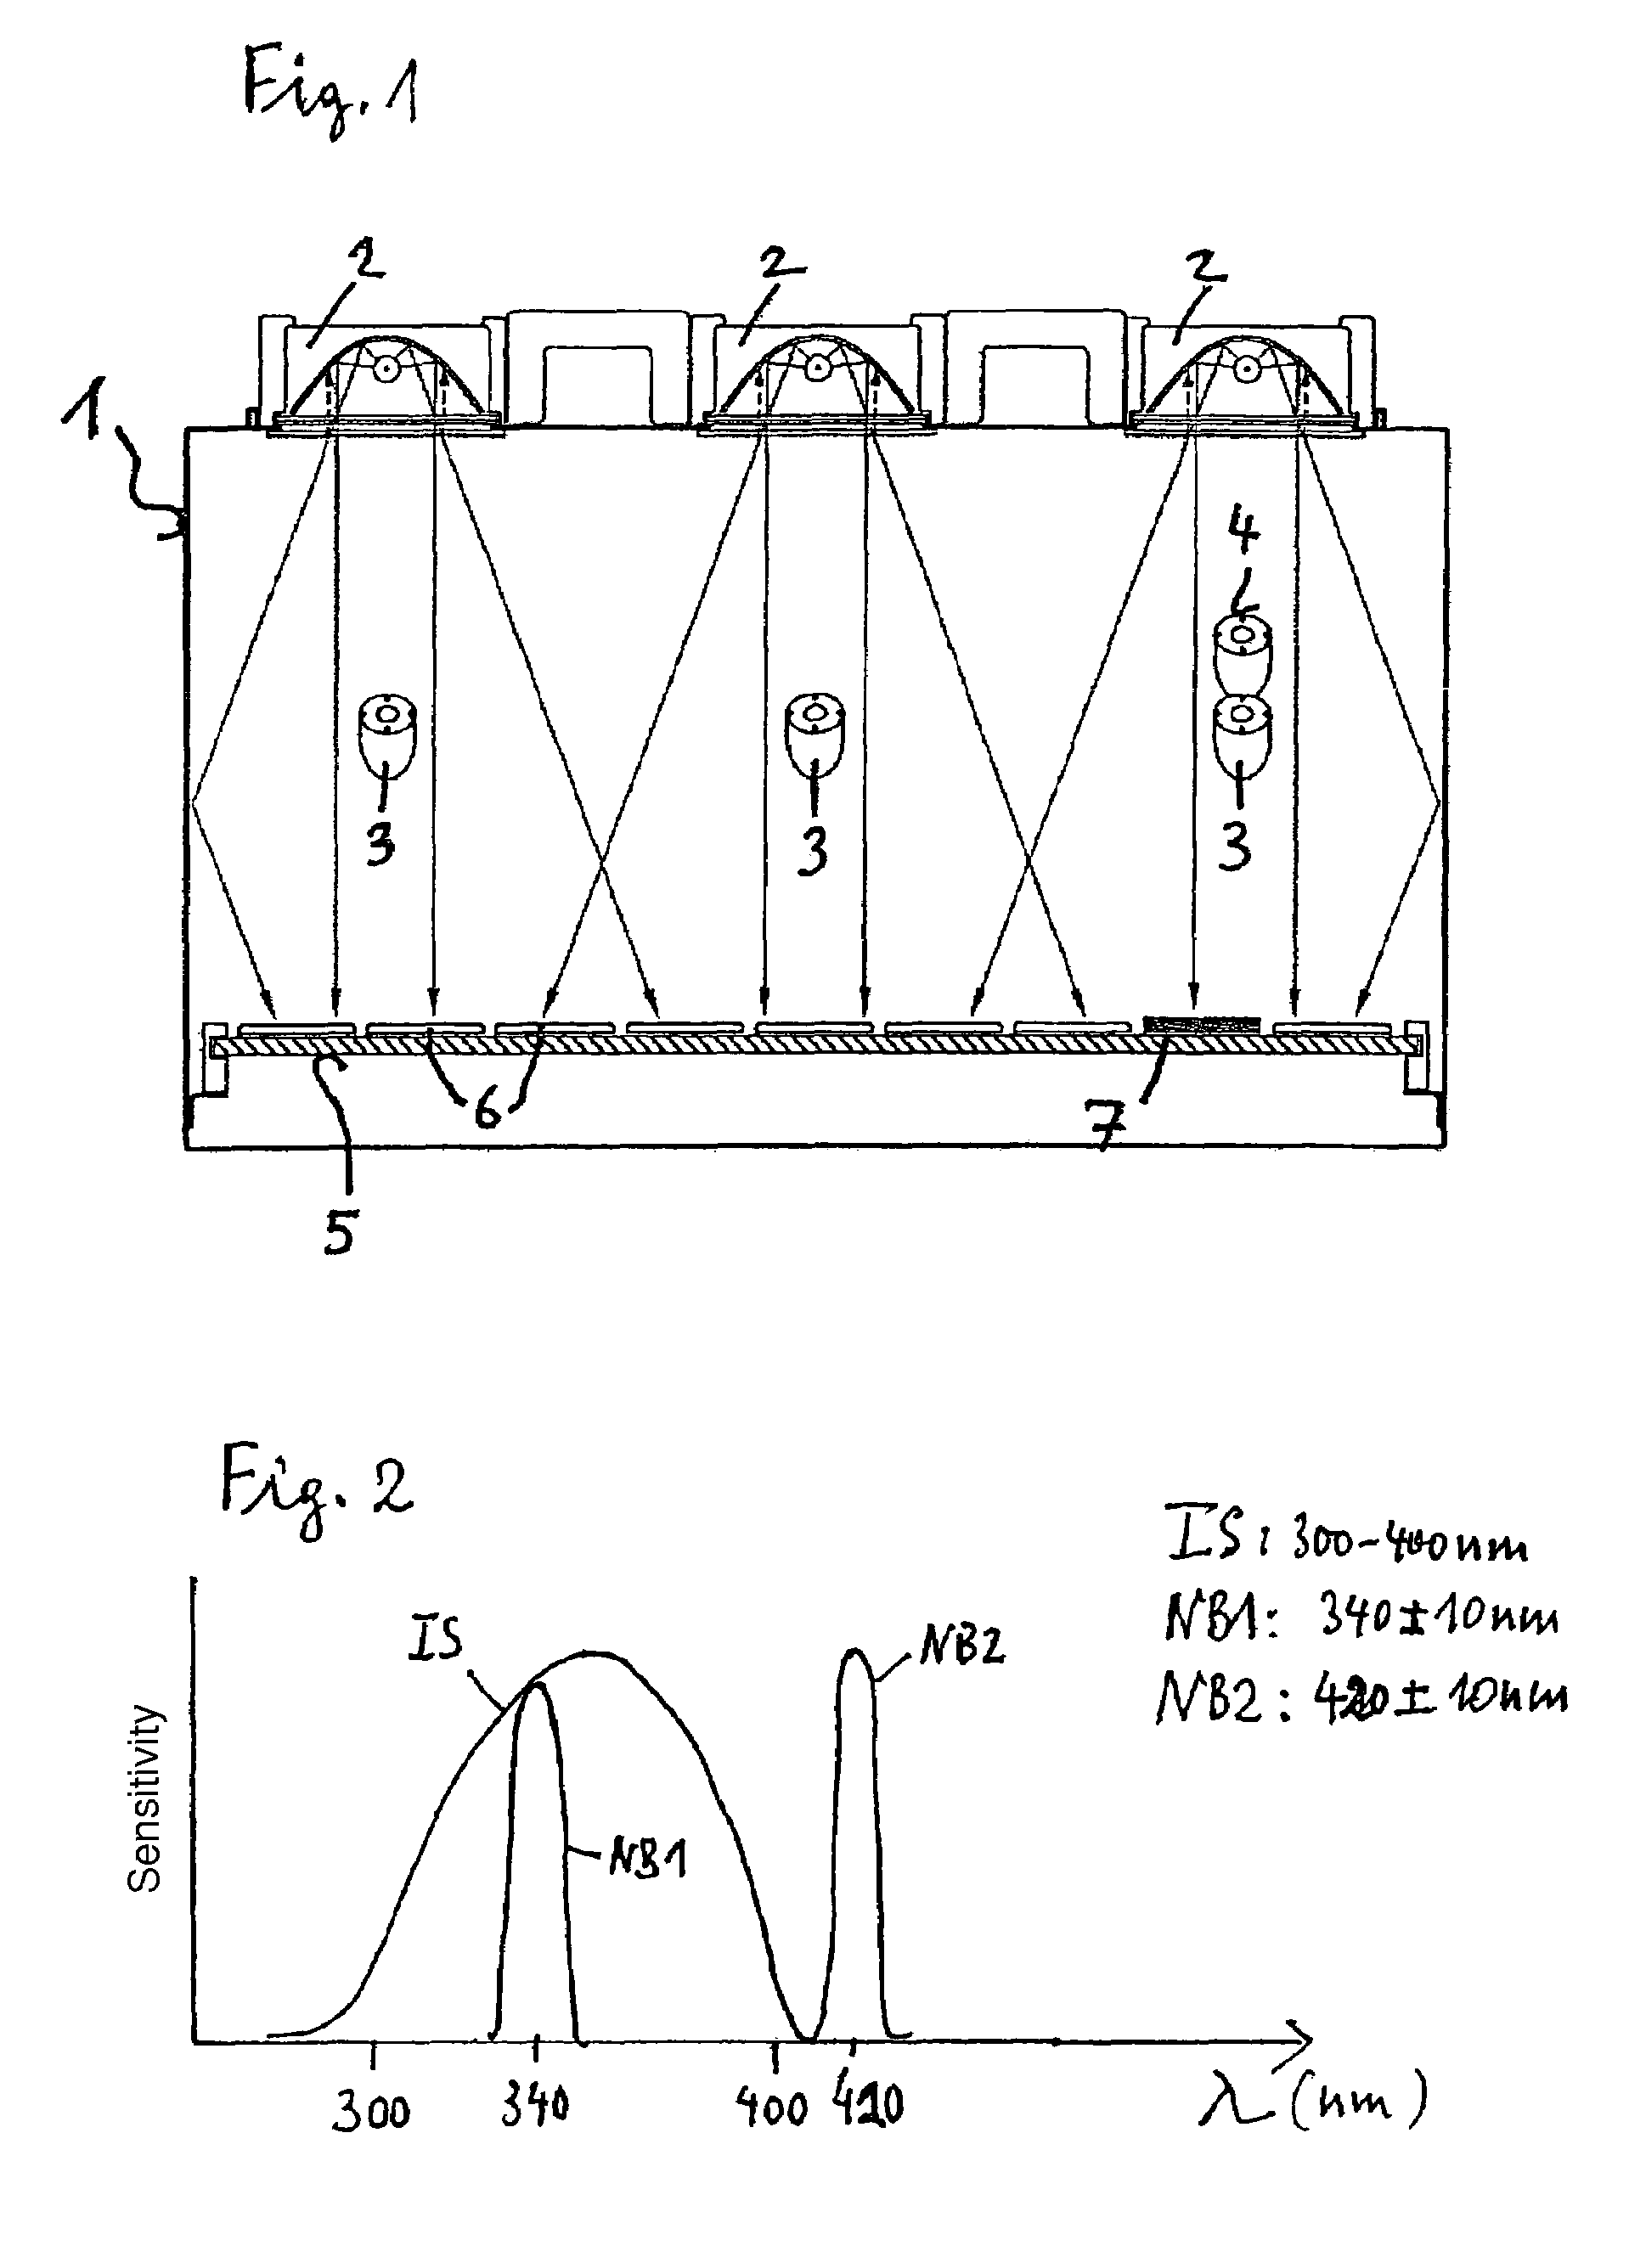 Weathering apparatus with UV radiation sources and radiation sensors containing a double-calibrated UV sensor